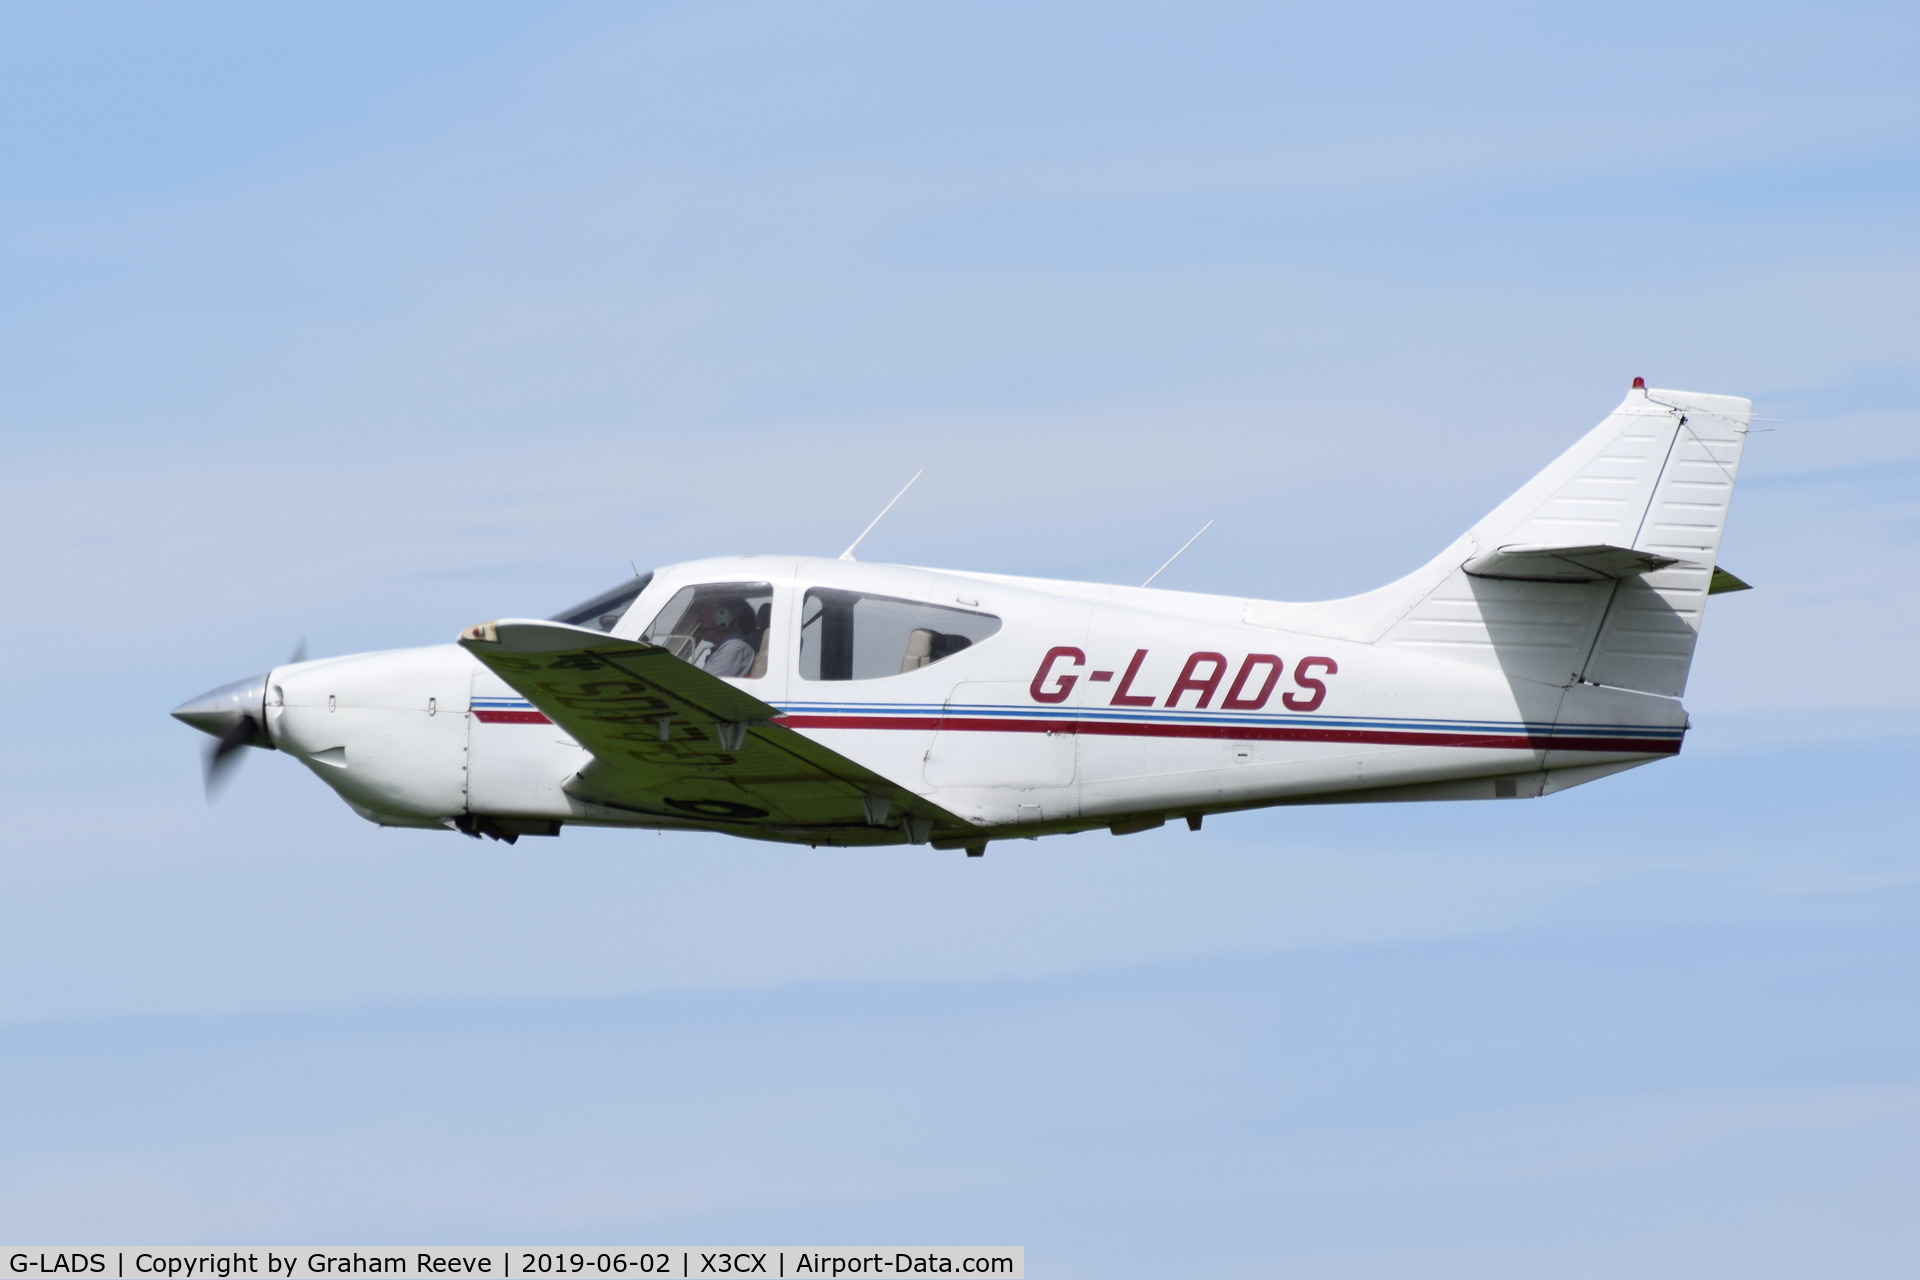 G-LADS, 1977 Rockwell Commander 114 C/N 14314, Departing from Northrepps.